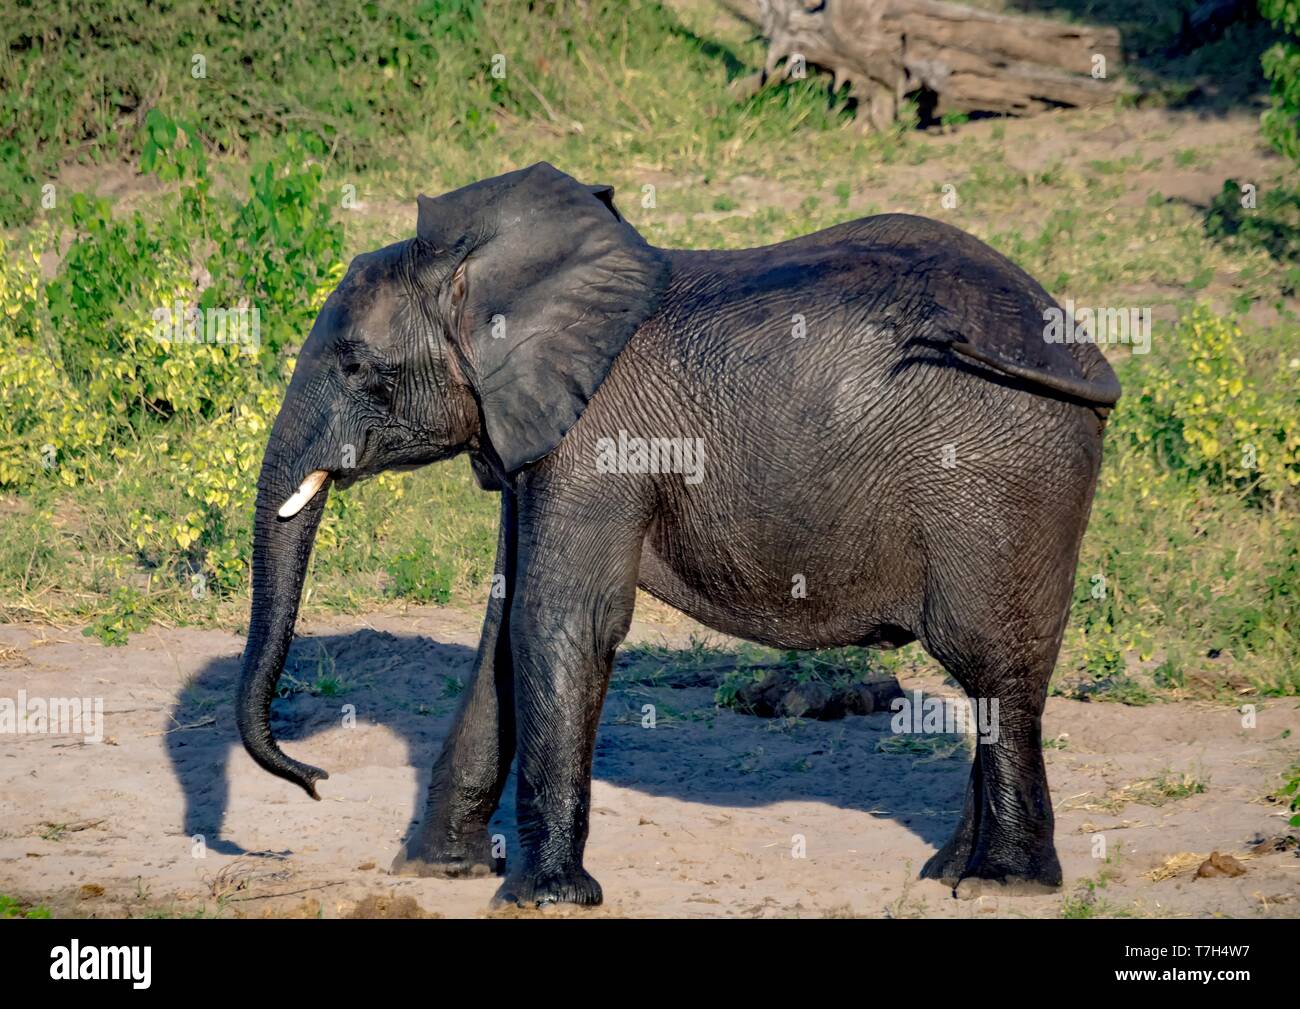 Elephants bathing and playing in the water of the chobe river in Botswana during summer Stock Photo